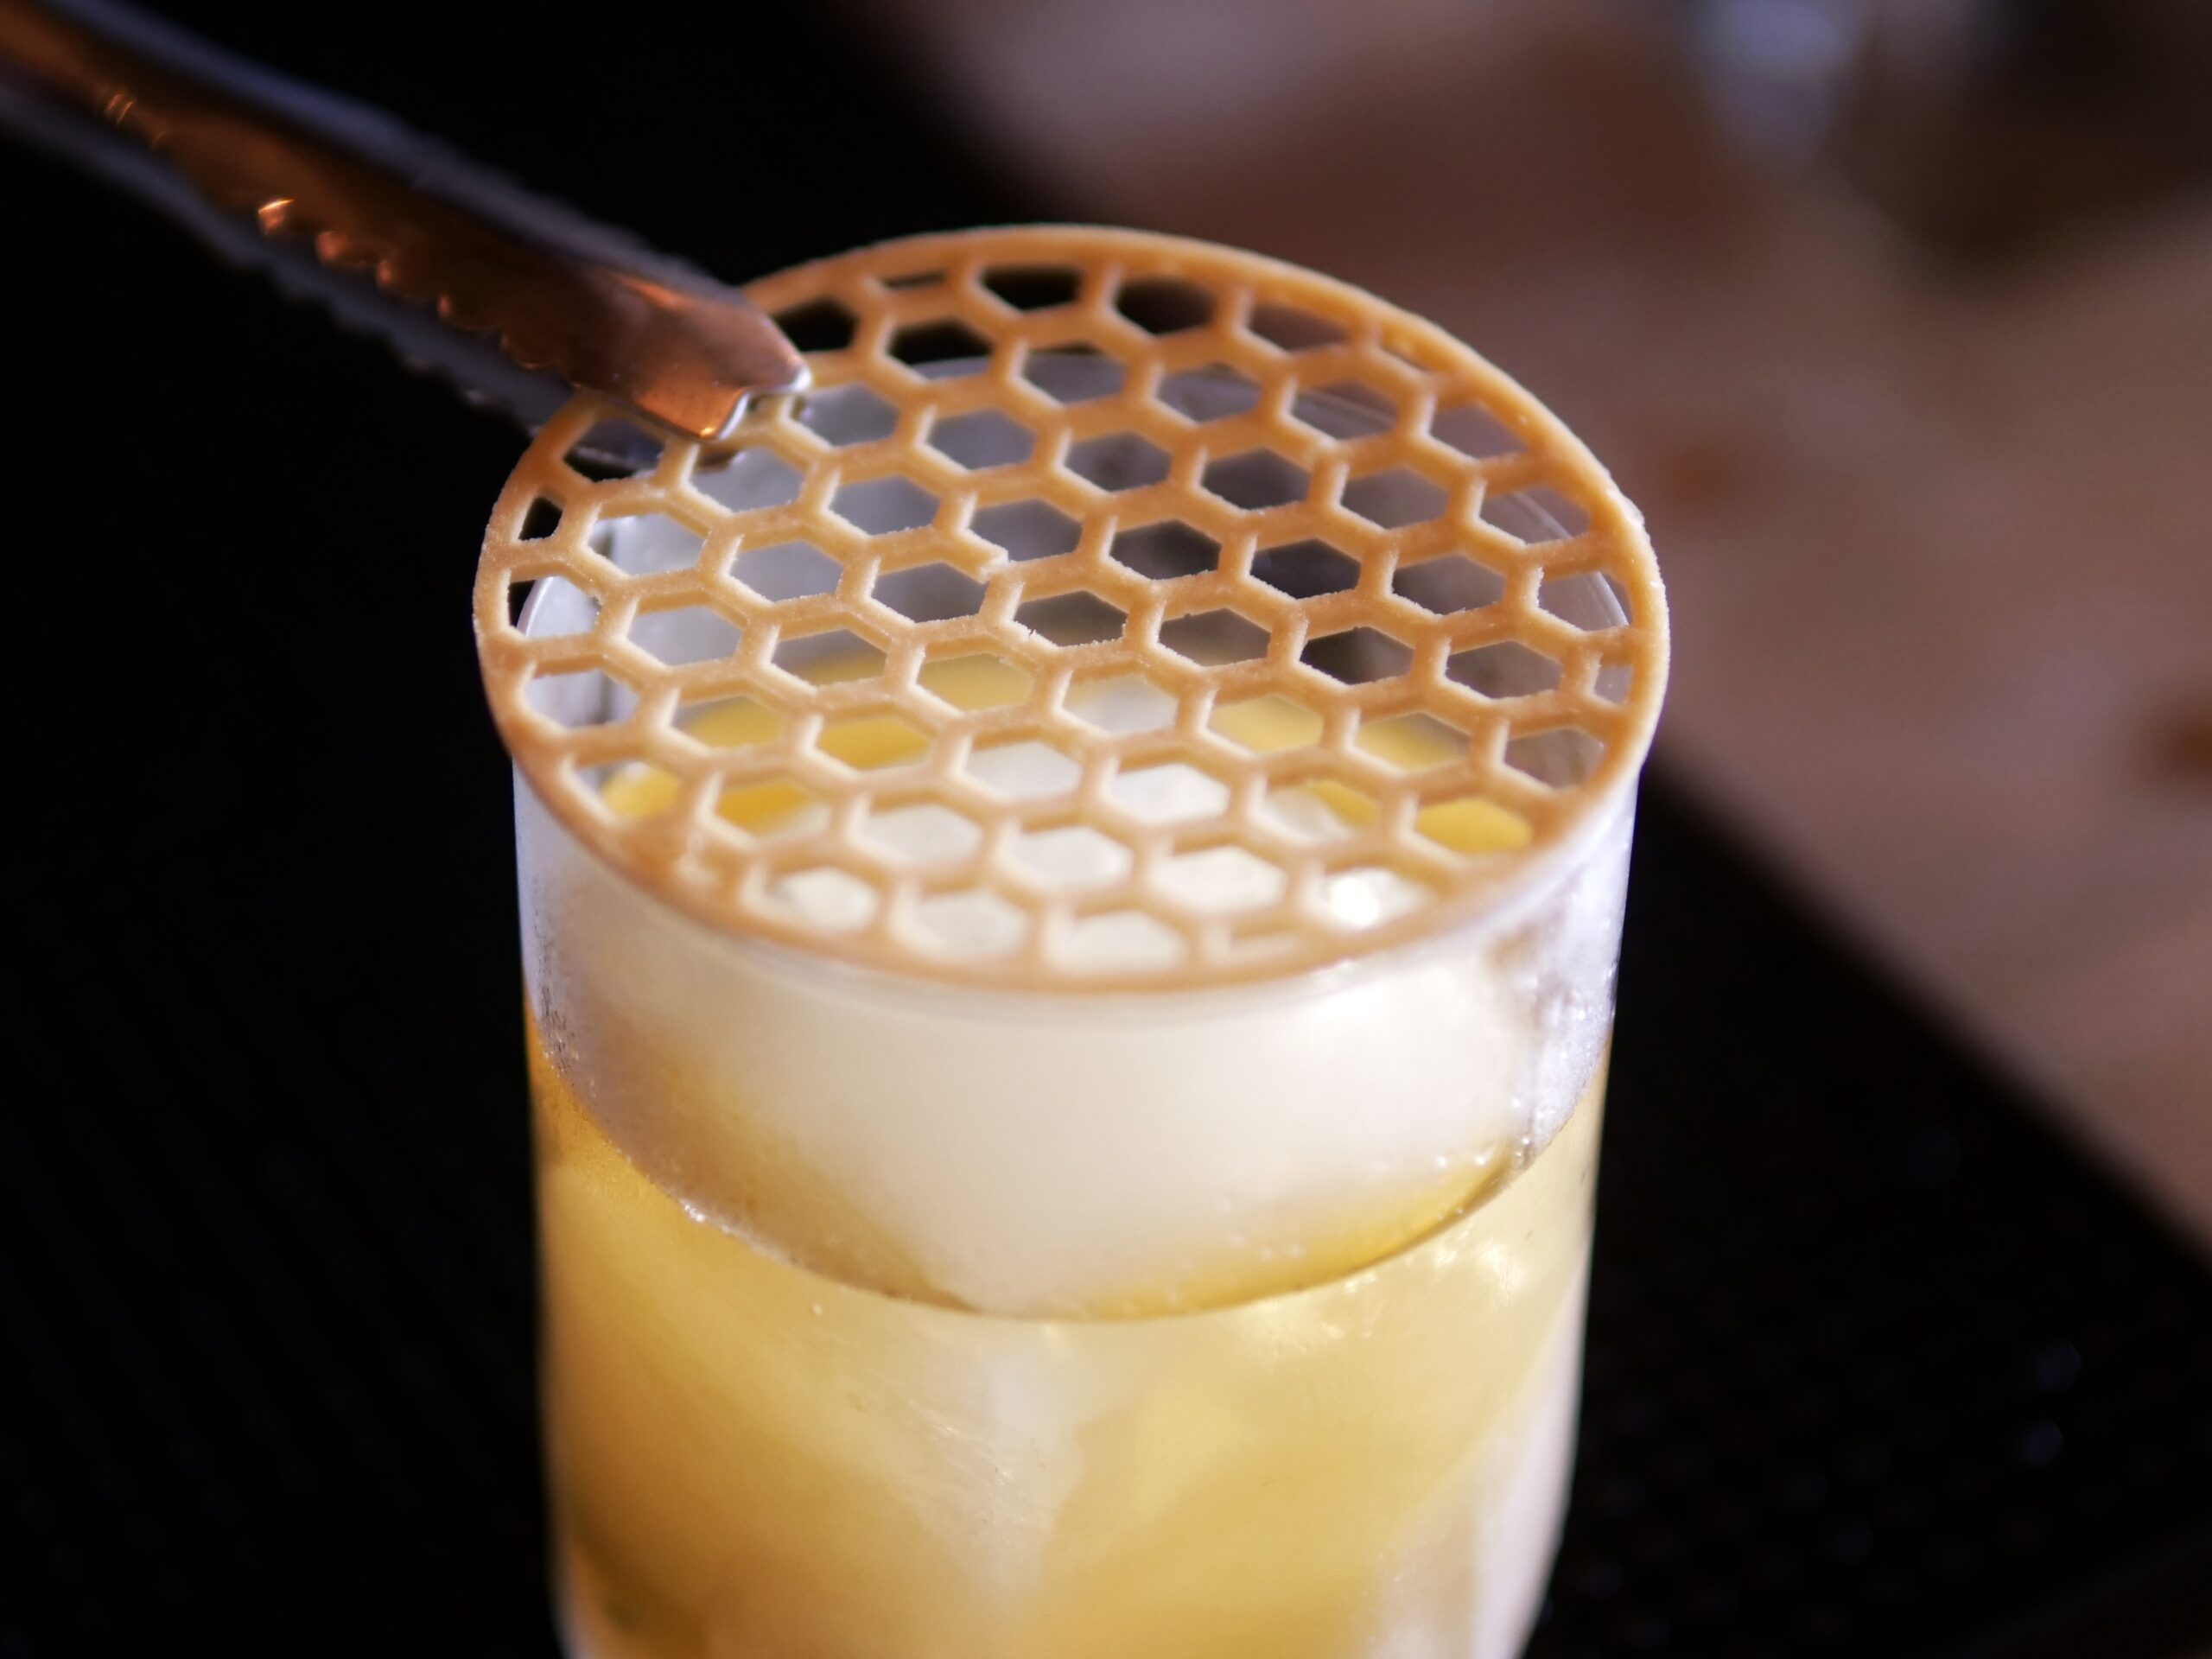 Serving the Honeygroni at Apiary, cafe & Bar in Brighton